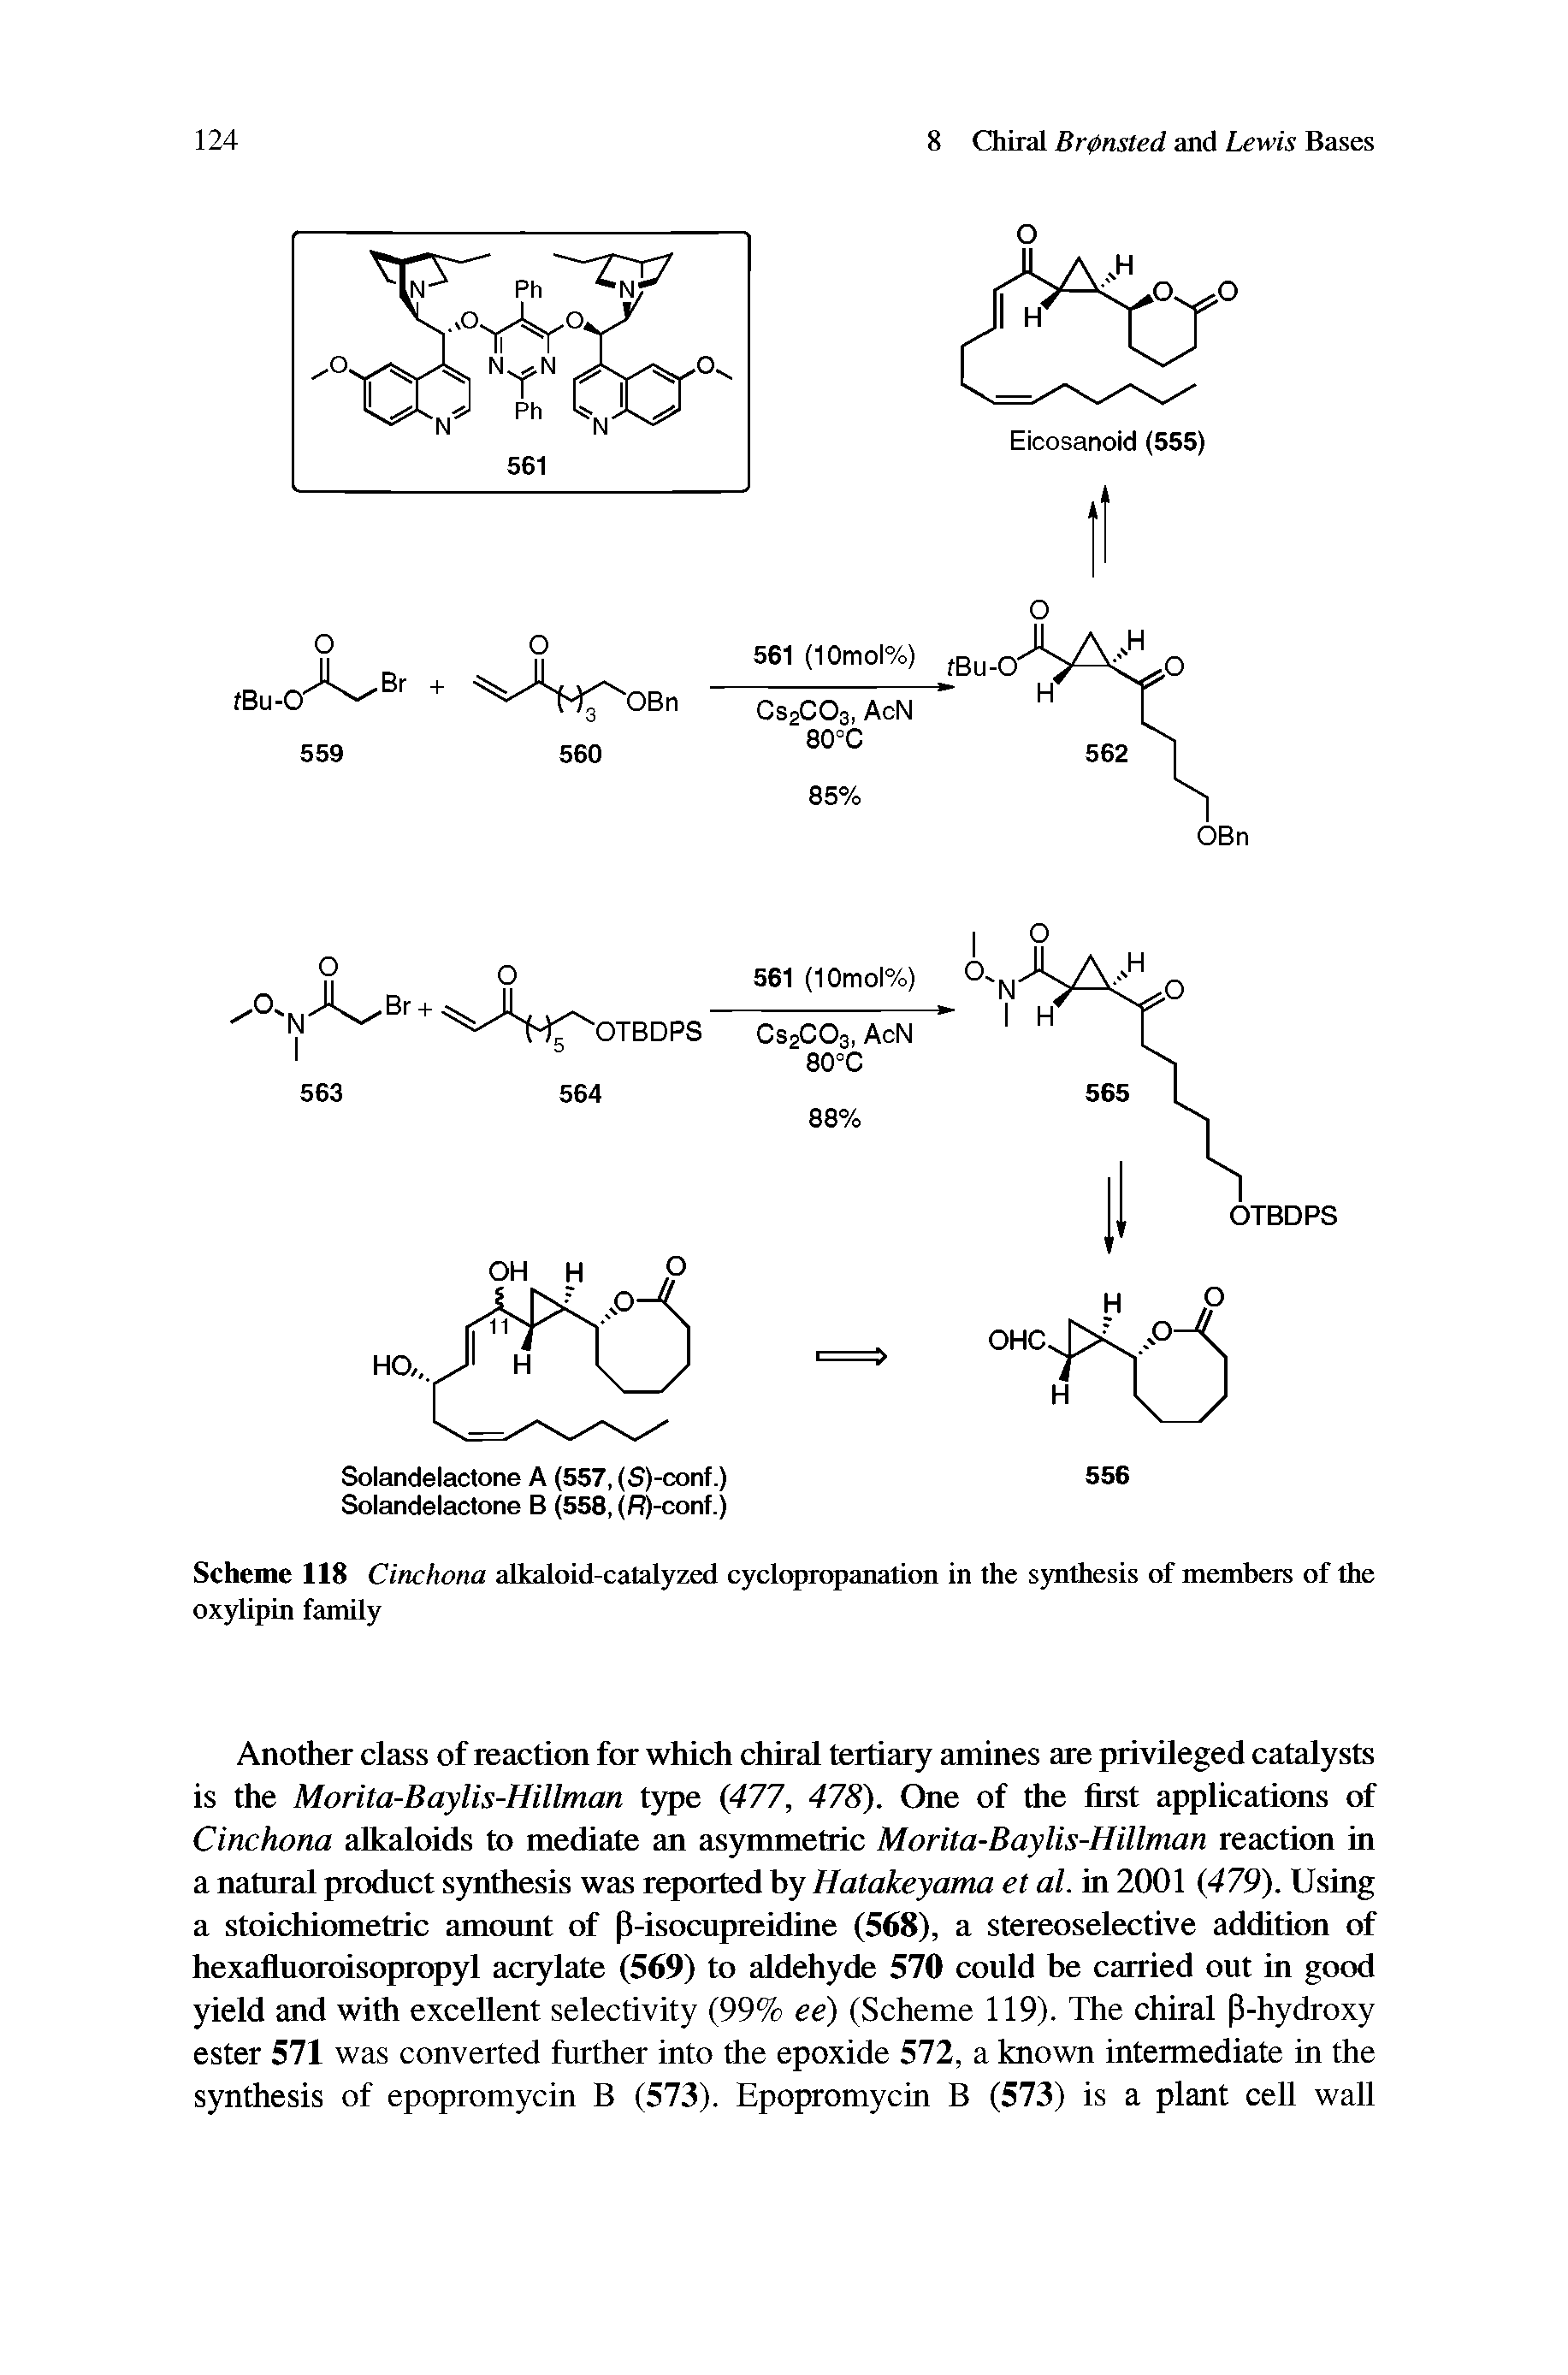 Scheme 118 Cinchona alkaloid-catalyzed cyclopropanation in the synthesis of members of the oxylipin family...